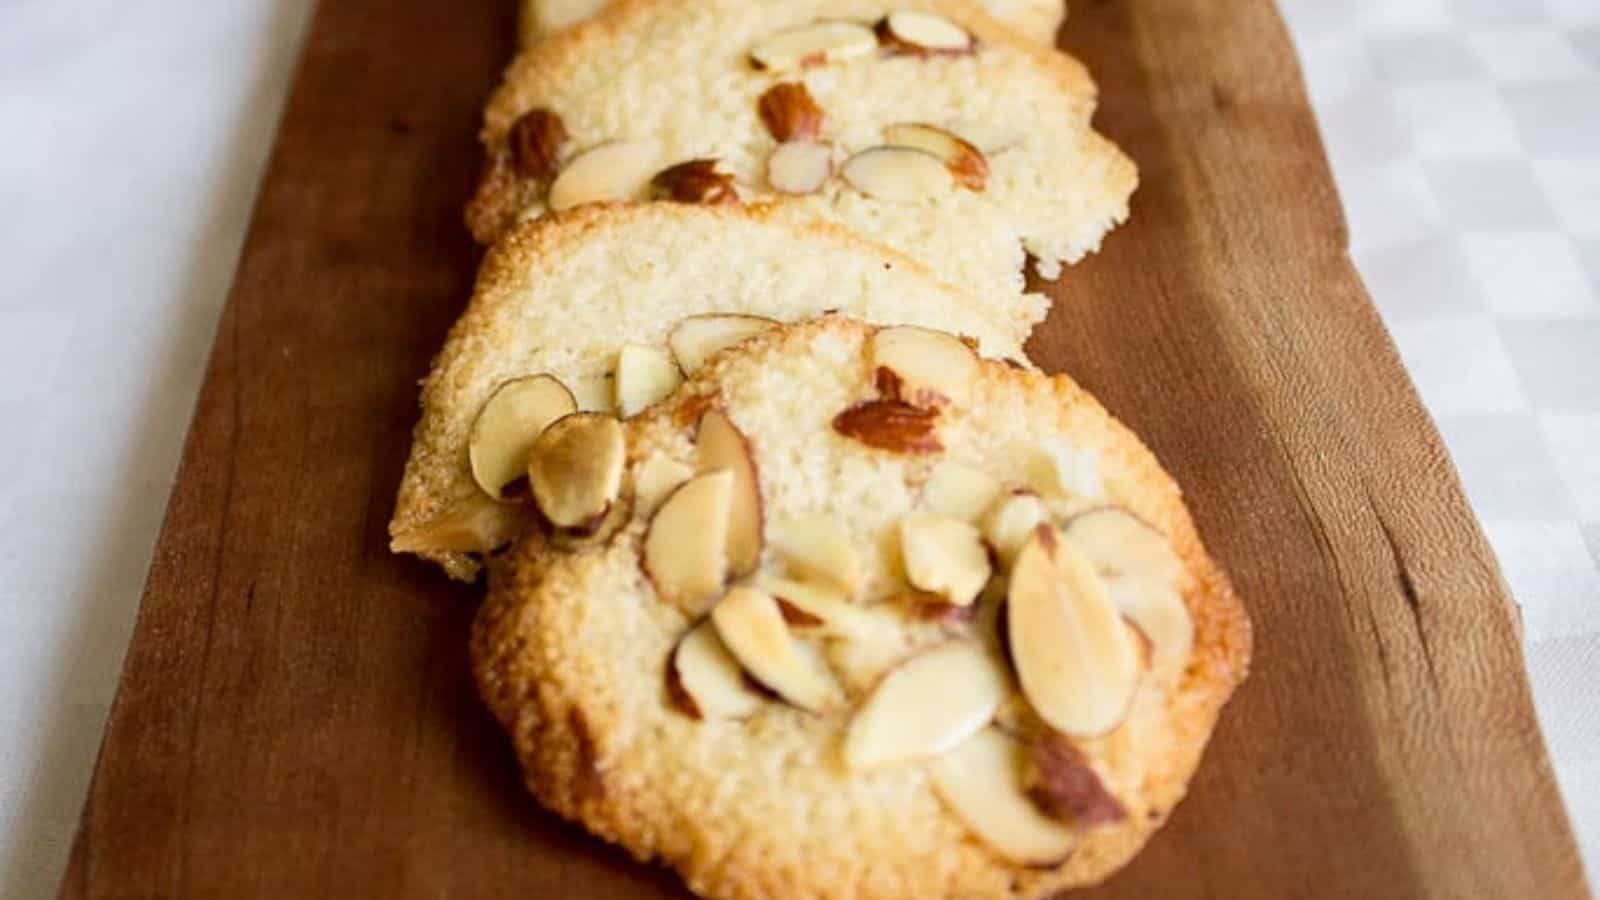 Almond cookies on a wooden cutting board.